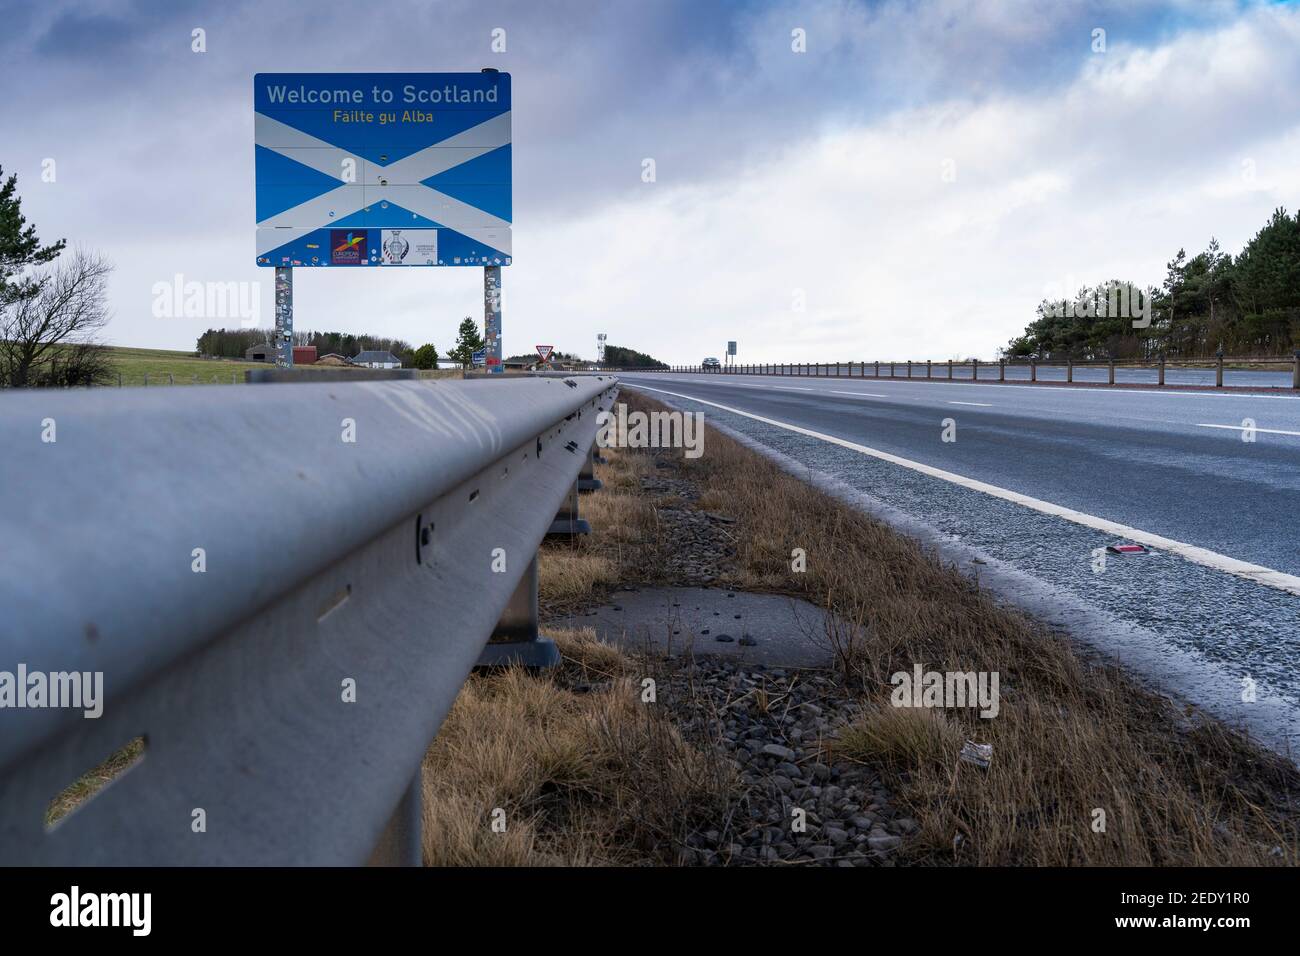 Lamberton, Scotland, UK. 15 Feb 2021. View of Scottish border on A1 just north of Berwick-upon-Tweed. Scotland’s First Minister Nicola Sturgeon has threatened to close the border between Scotland and England because English quarantine rules which come into force today are less strict than those in Scotland.  Iain Masterton/Alamy Live News Stock Photo